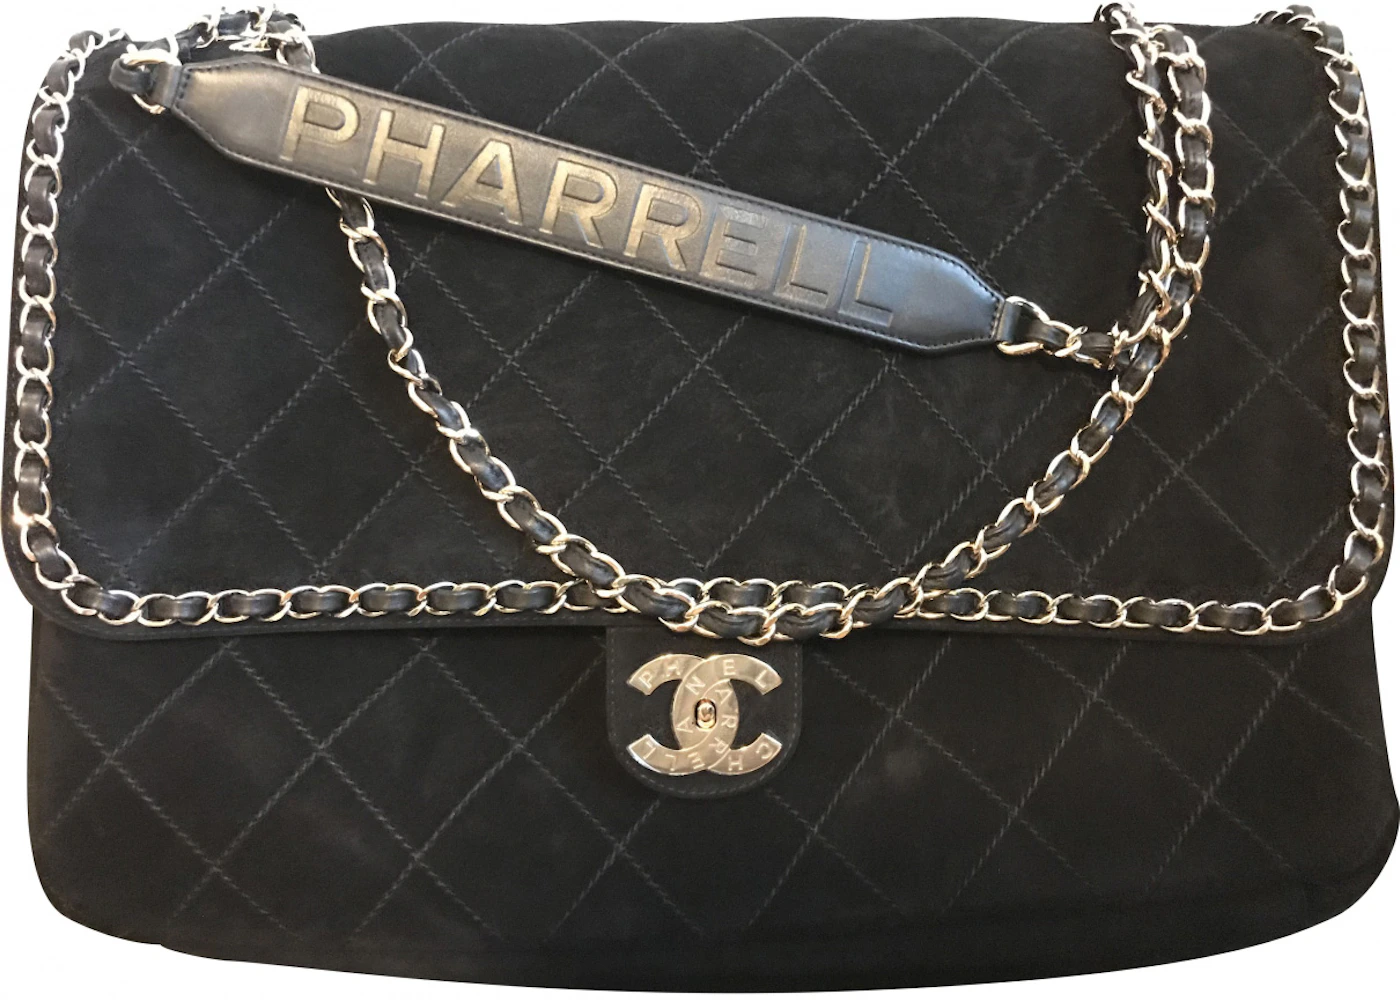 new chanel Tag Archive - PurseBop